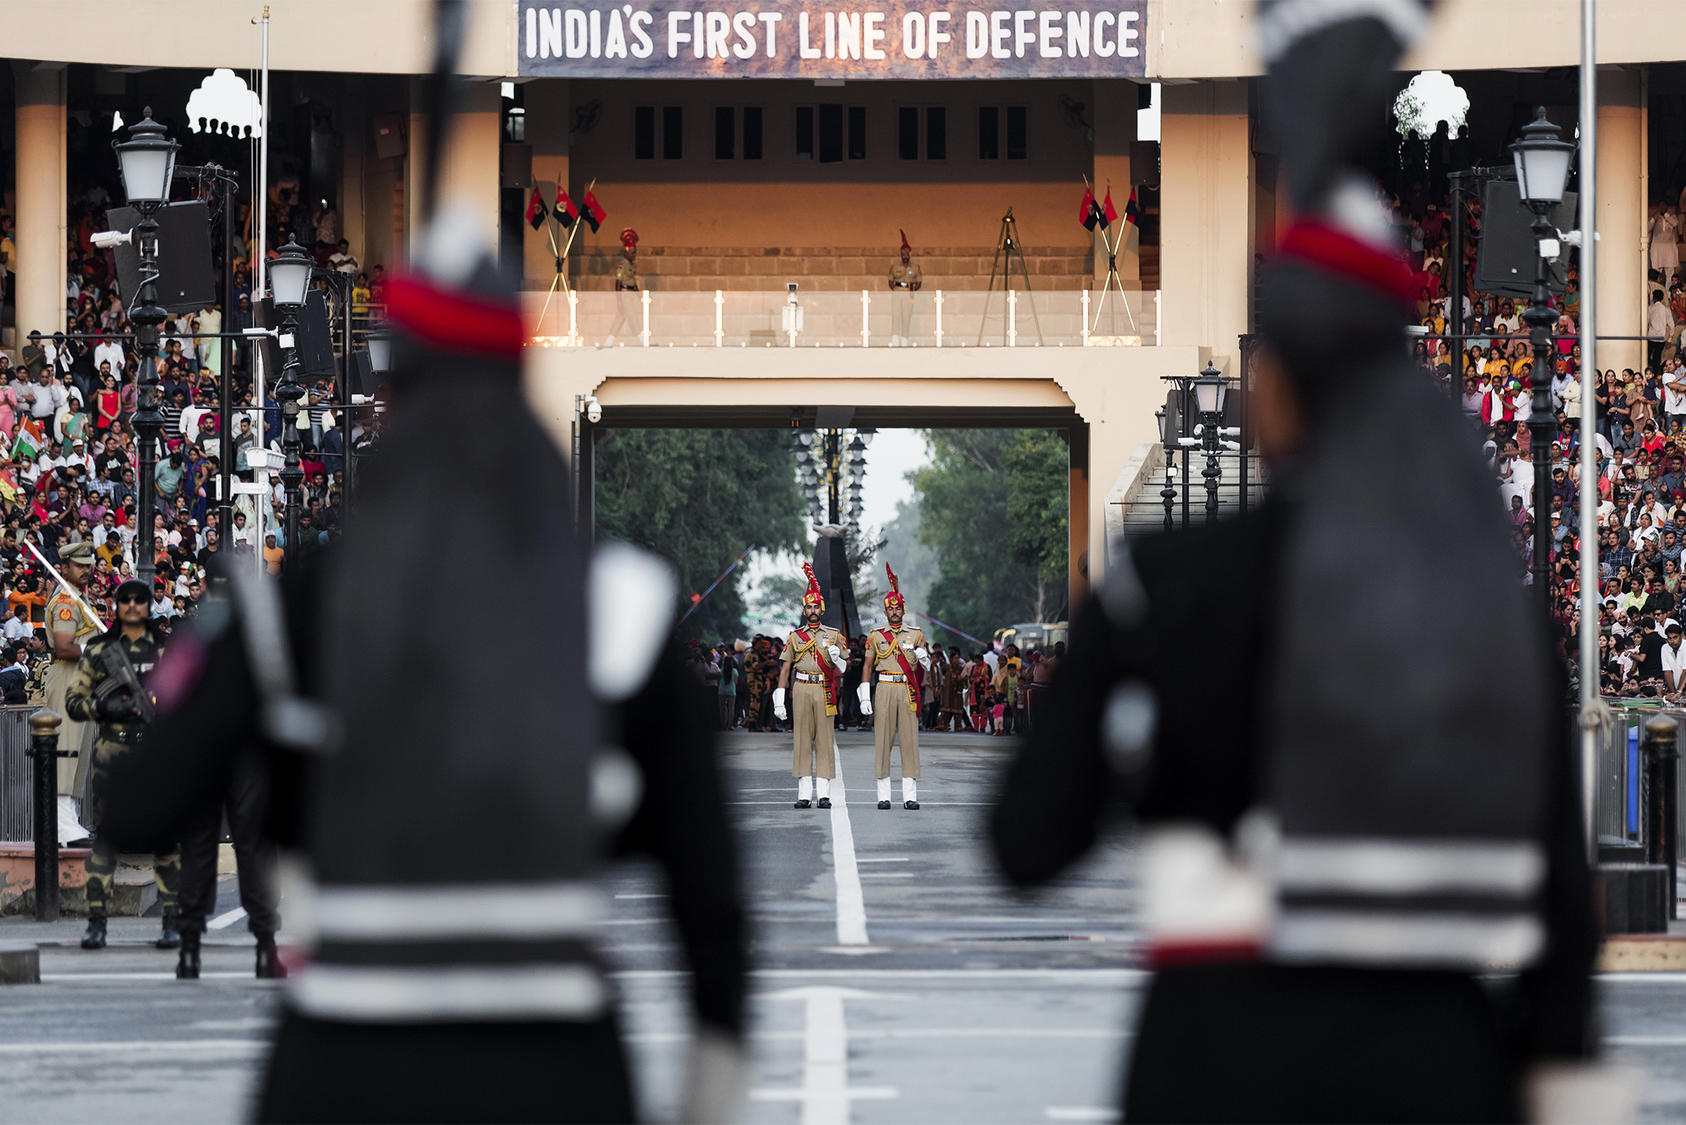 Pakistani, foreground, and Indian border guards mimc each other's movements during their daily ceremonial face off, at the Wagah-Attari border crossing, Sept. 28, 2019. (Mustafa Hussain/The New York Times)